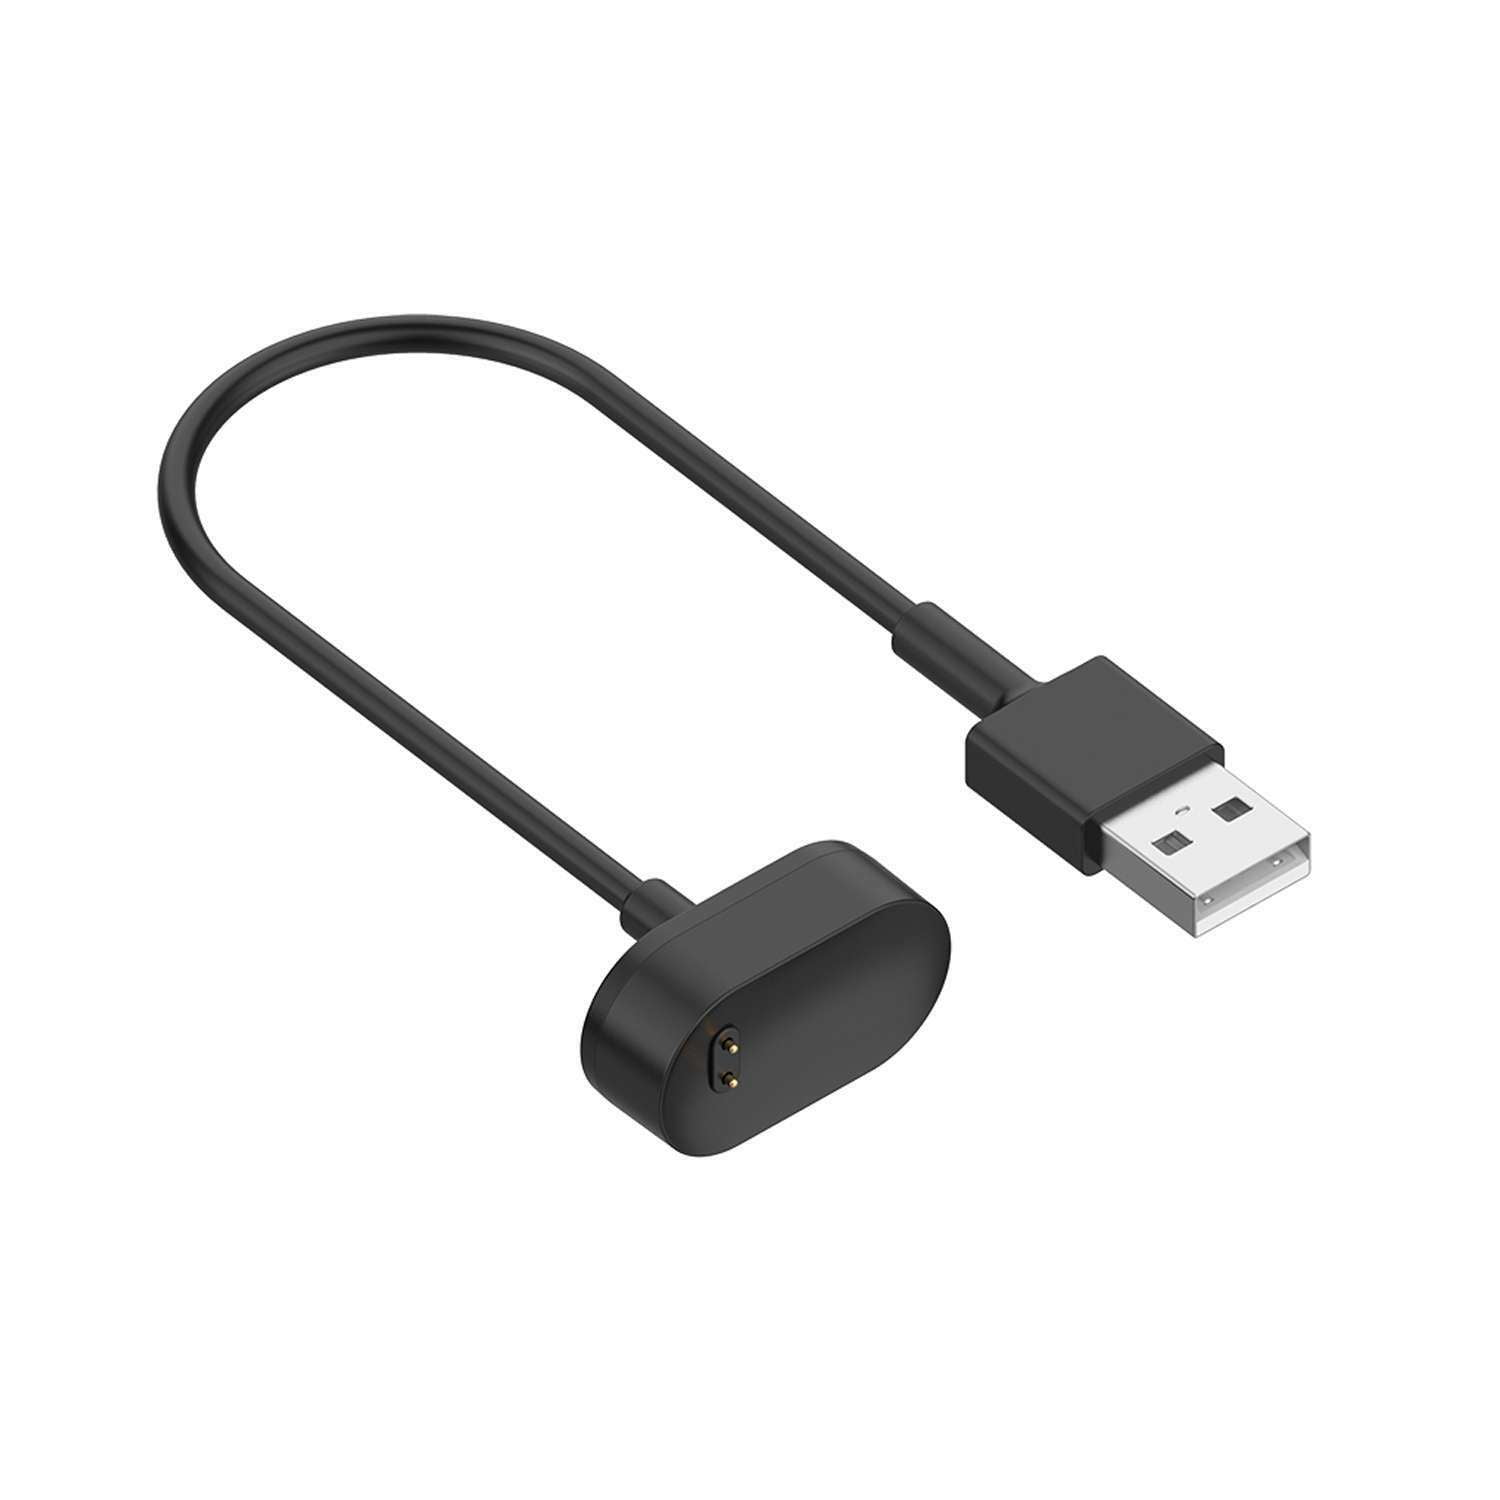 USB Charger Charging Cable For Fitbit Inspire Inspire HR Tracker 